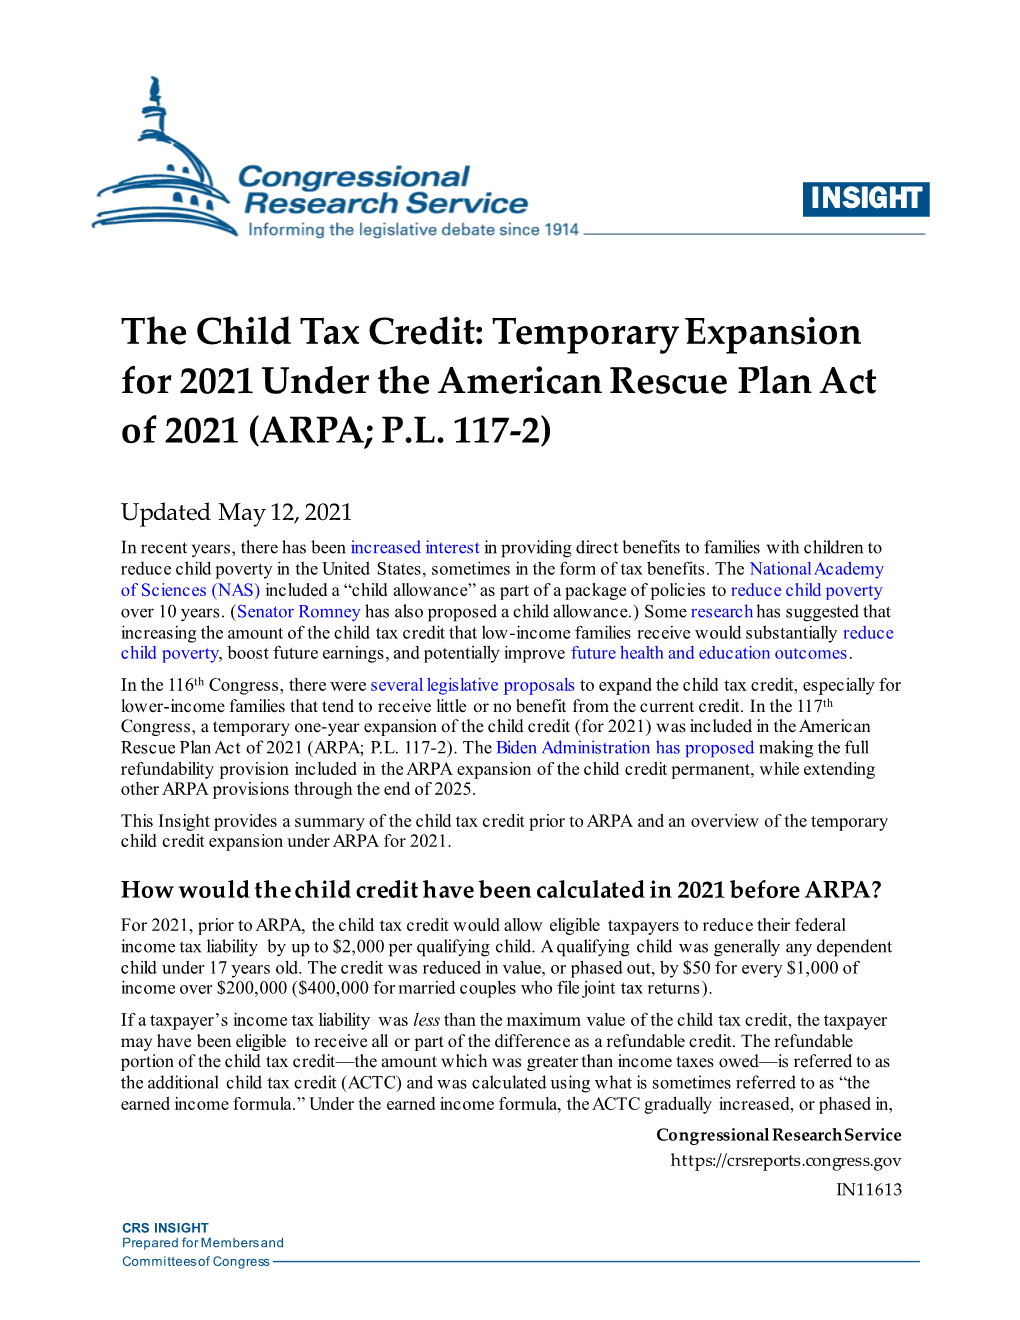 The Child Tax Credit: Temporary Expansion for 2021 Under the American Rescue Plan Act of 2021 (ARPA; P.L